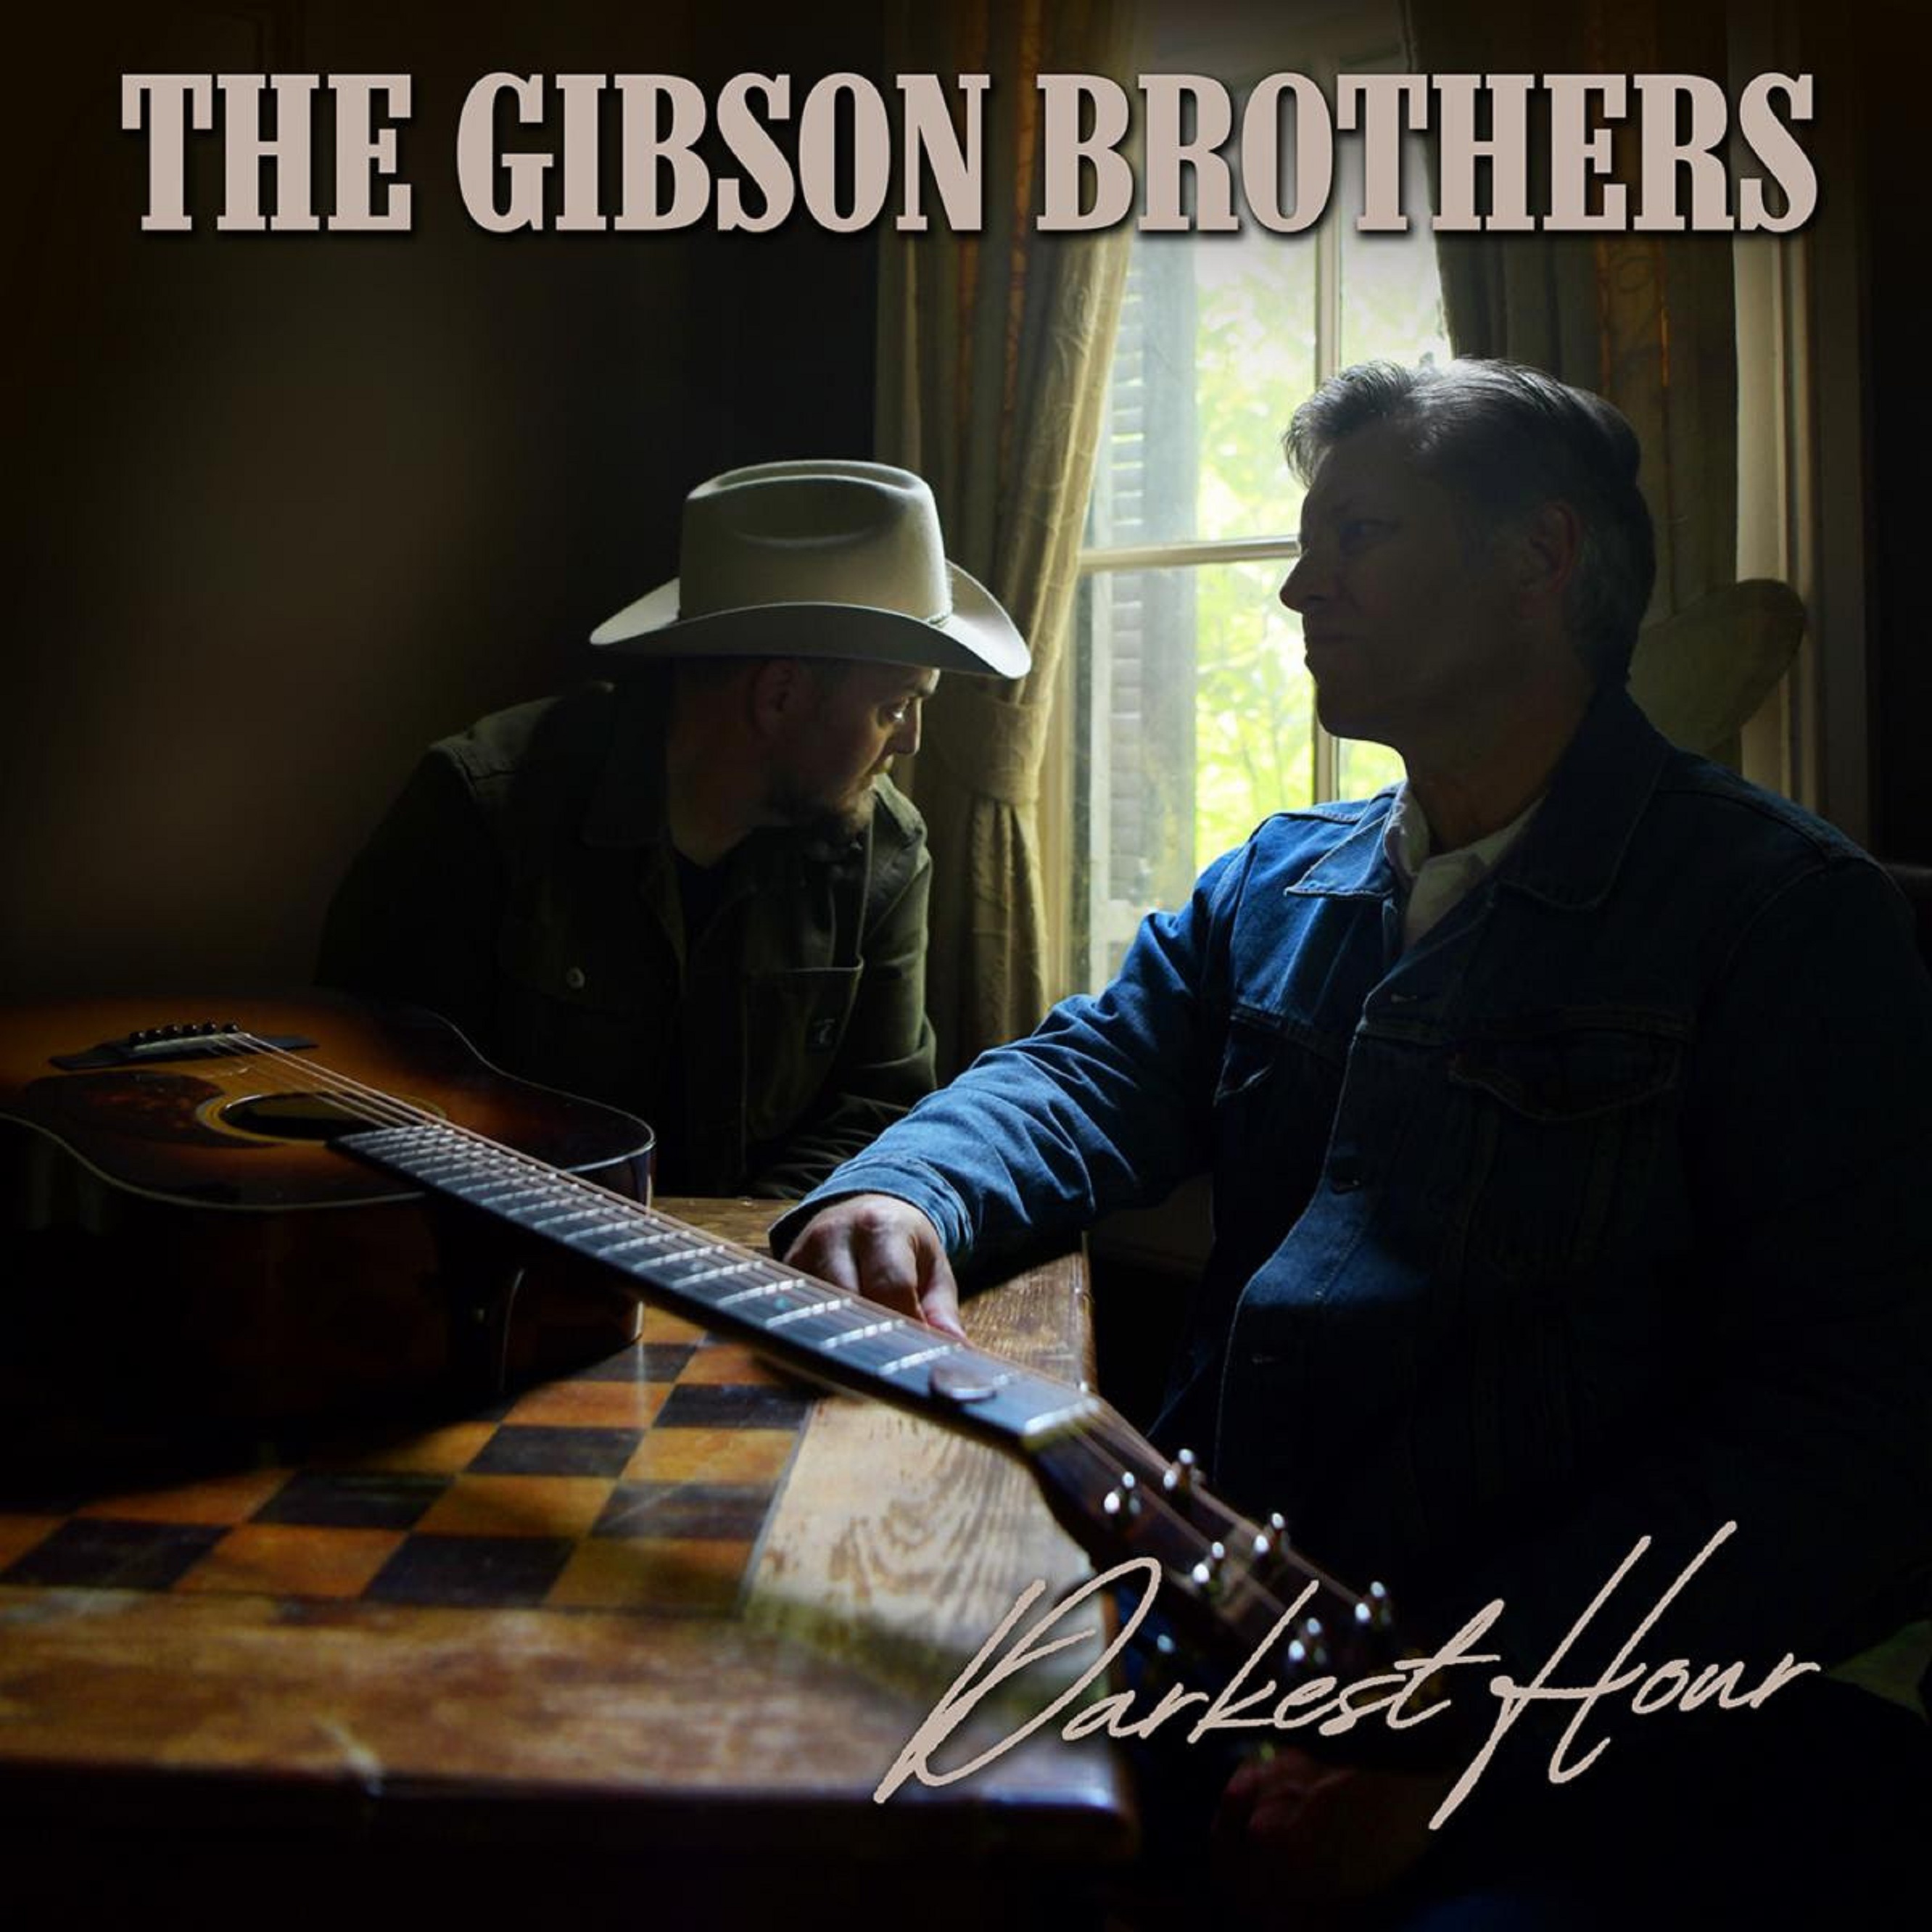 The Gibson Brothers Release Genre-Spanning New Album "Darkest Hour"